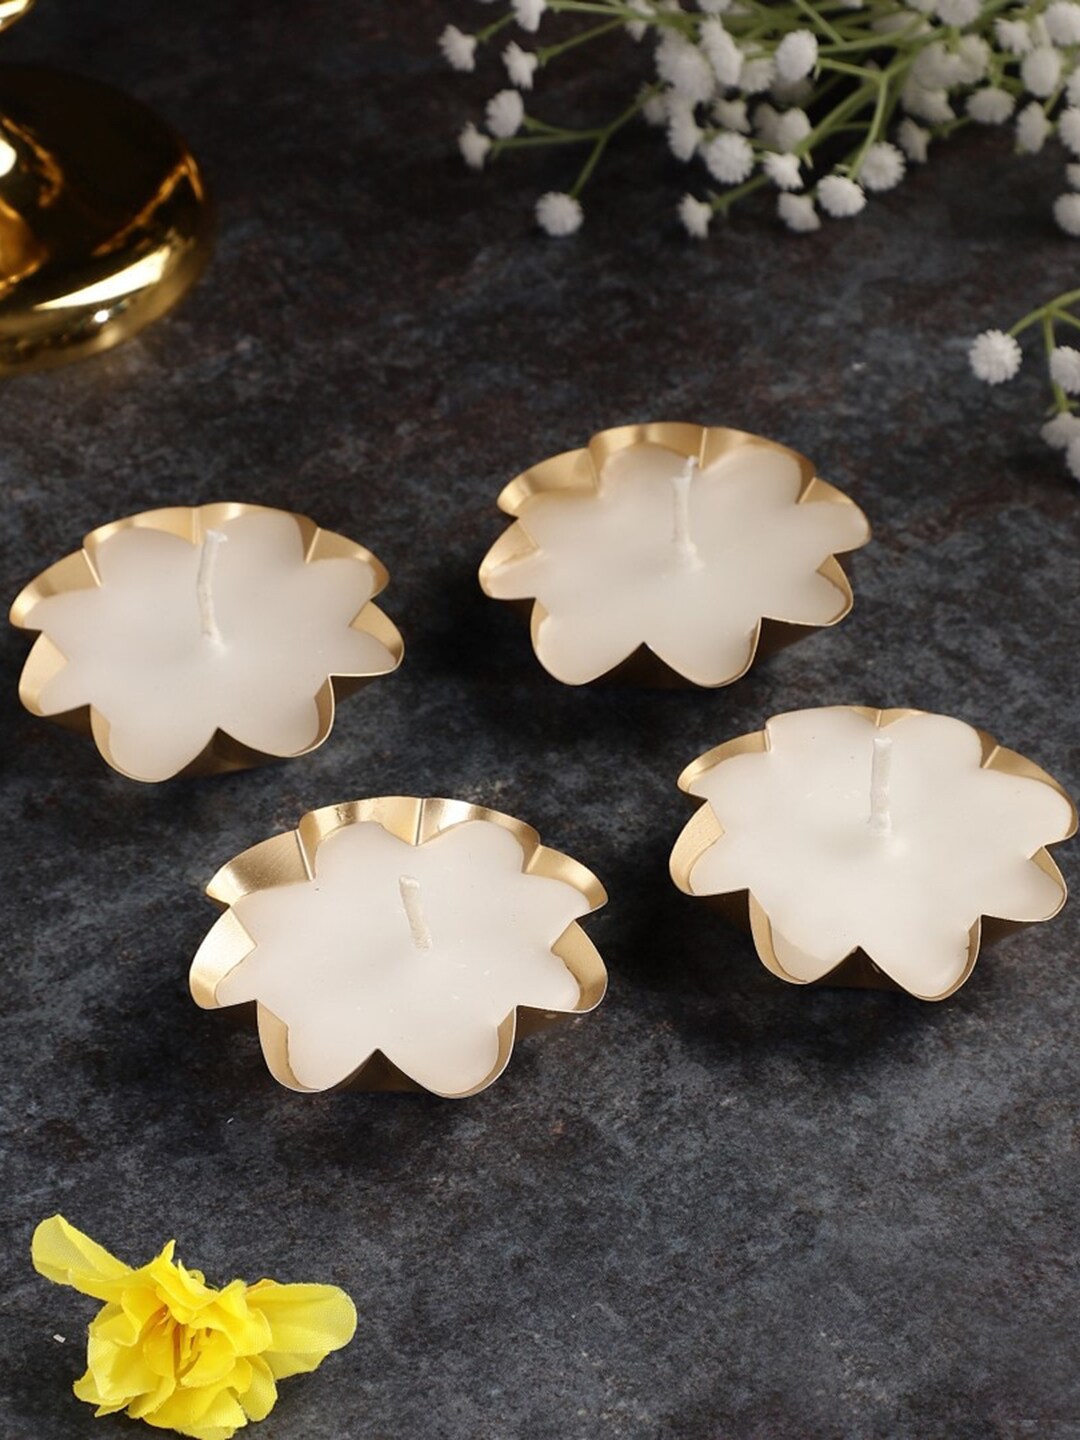 OddCroft  Set of 4 Gold-Toned Flower Shaped Tea-Light Candle Holder with Wax Price in India